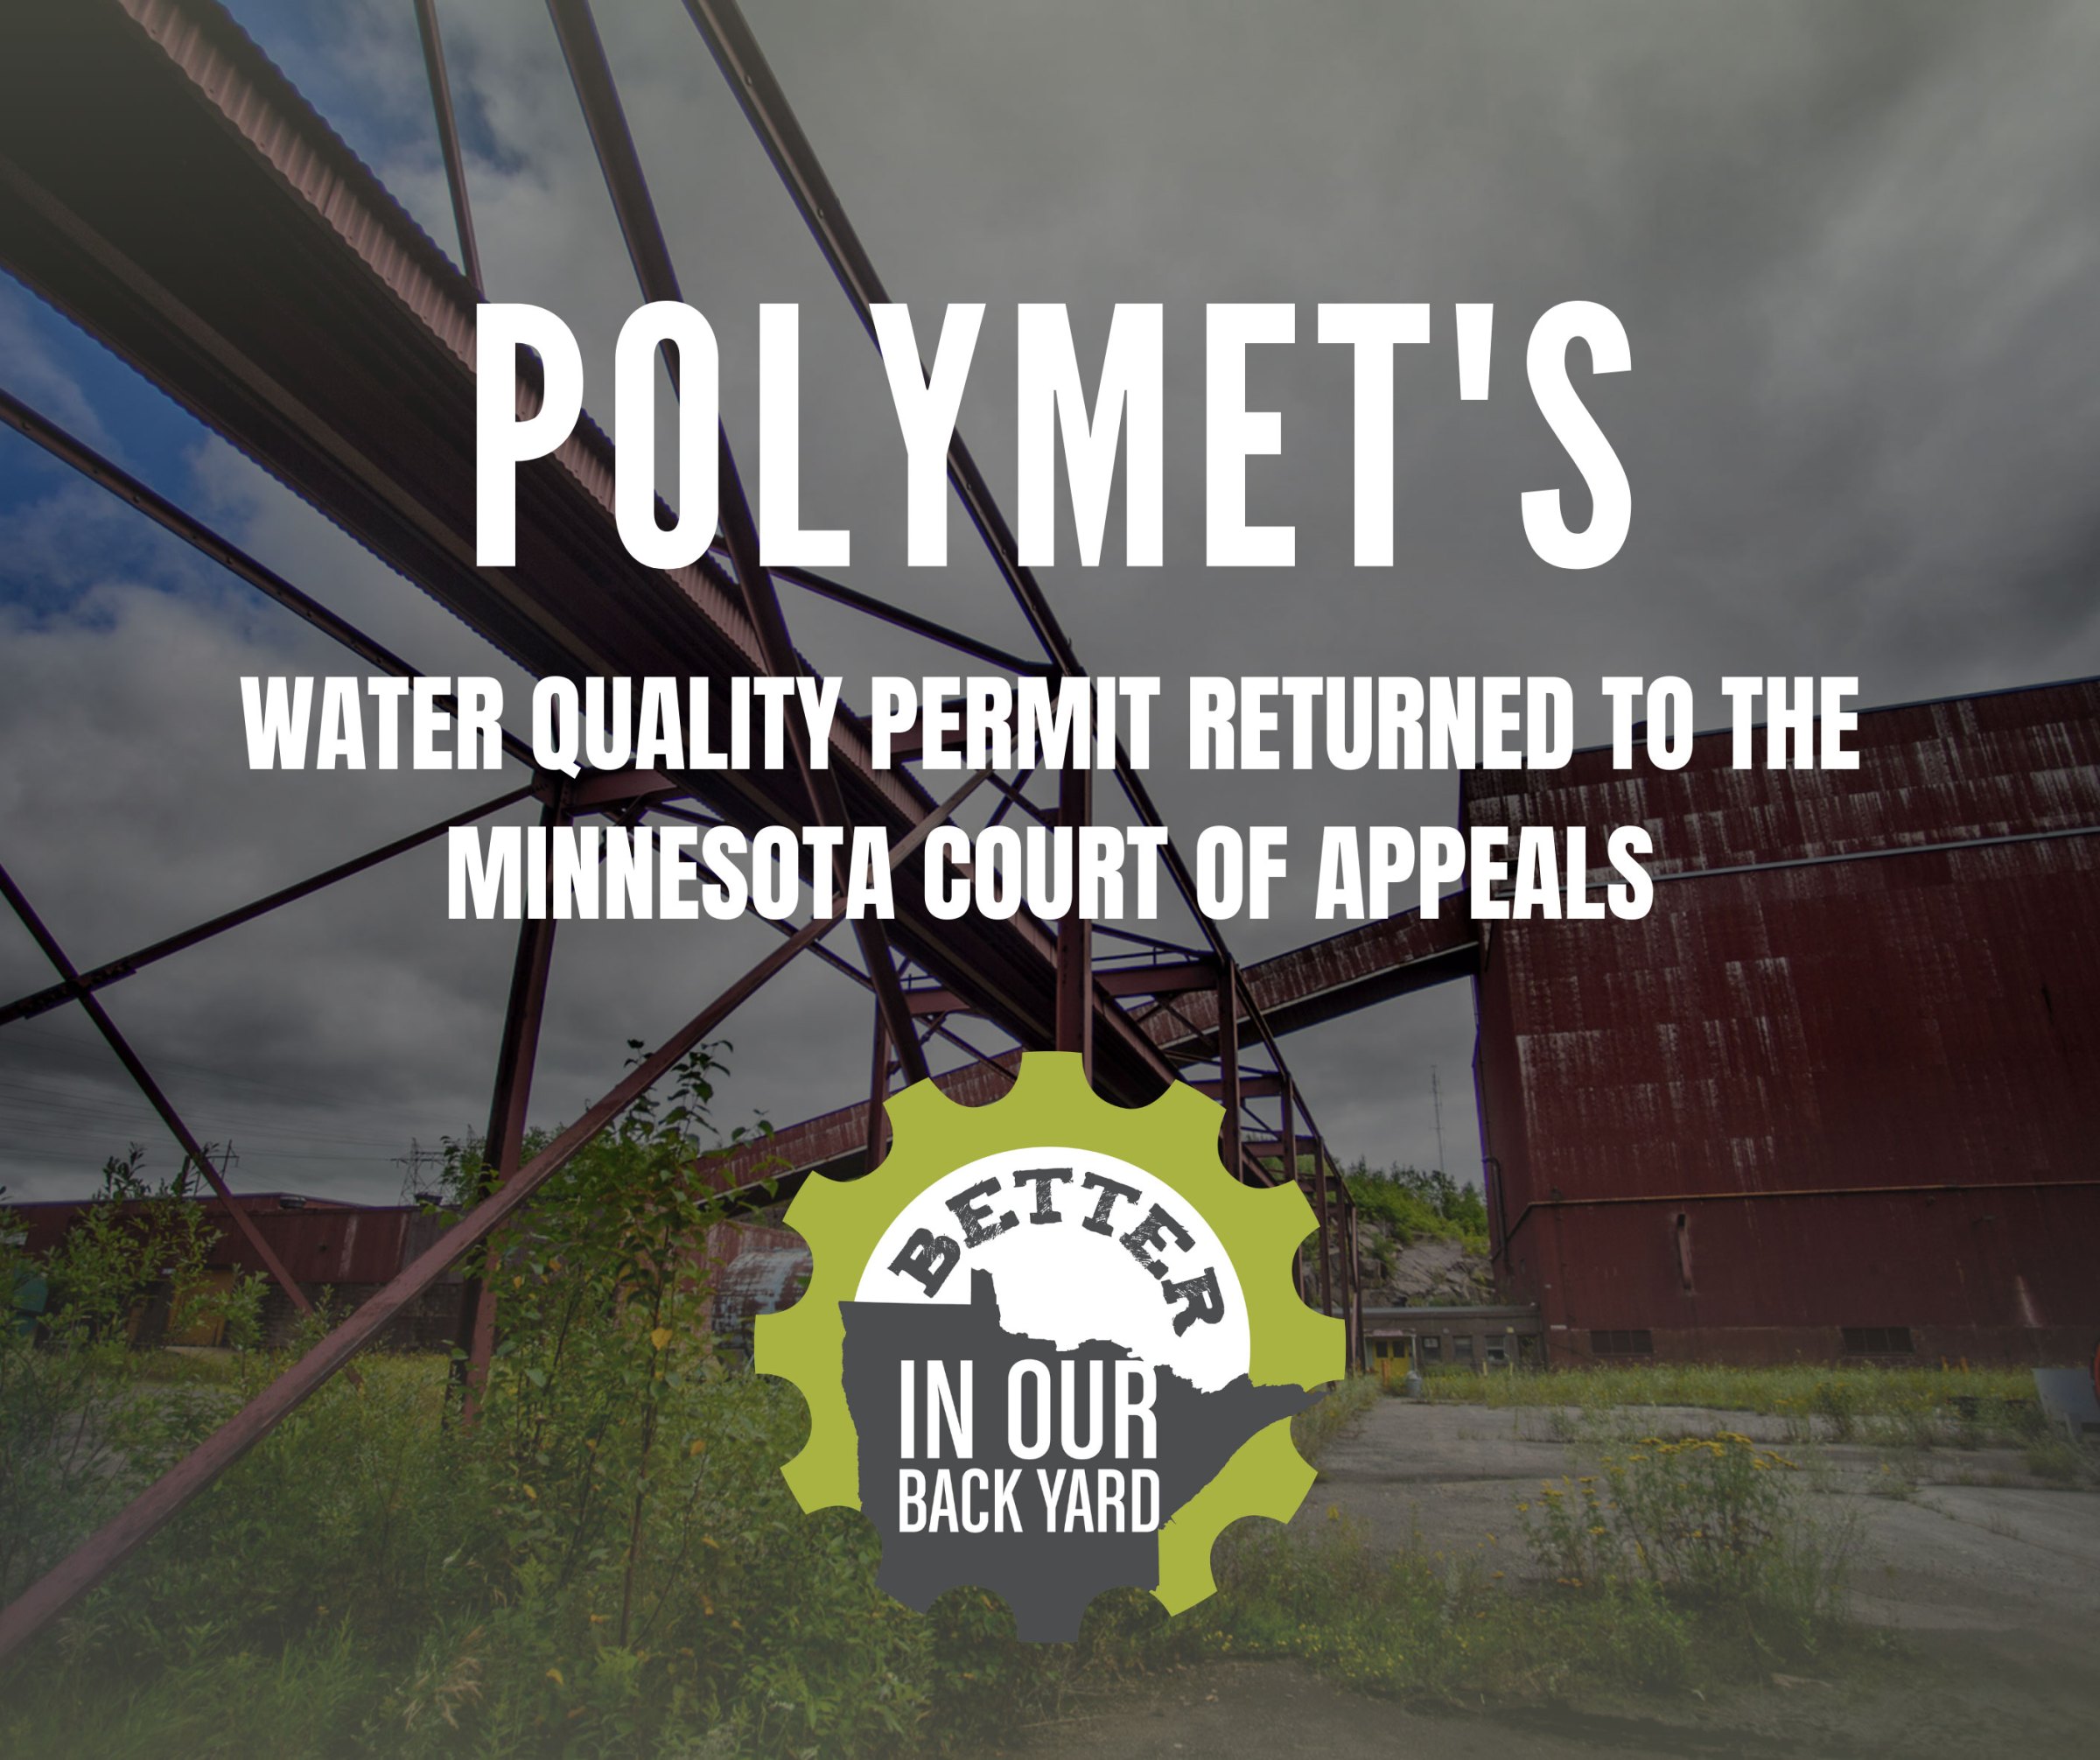 PolyMet Mining Committed to Extensive Regulatory Process